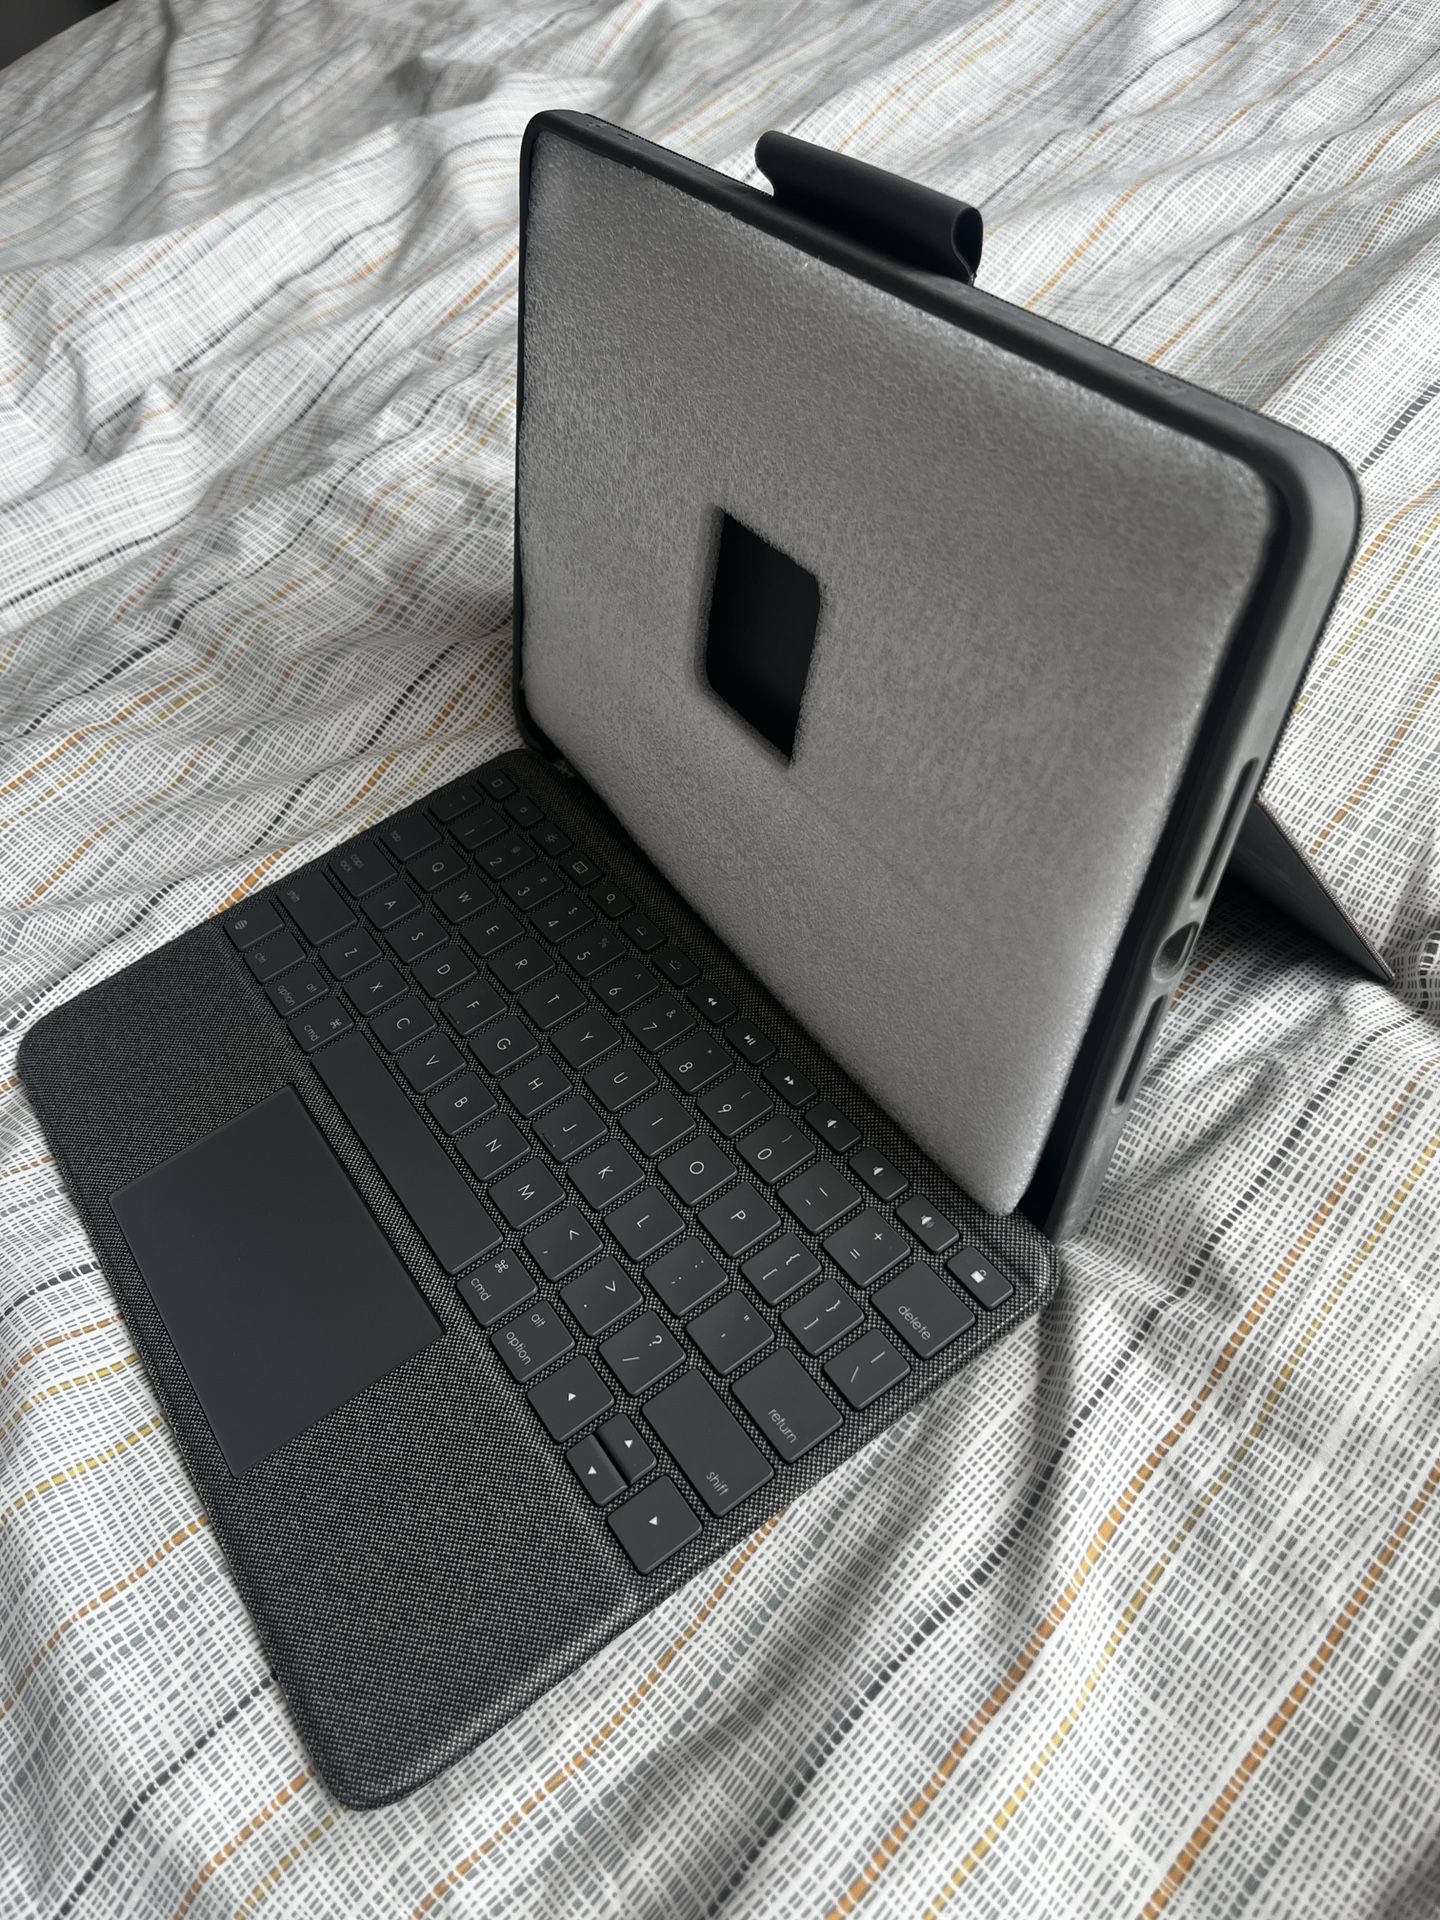 iPad Cover With Keyboard And Touchpad - Logitech